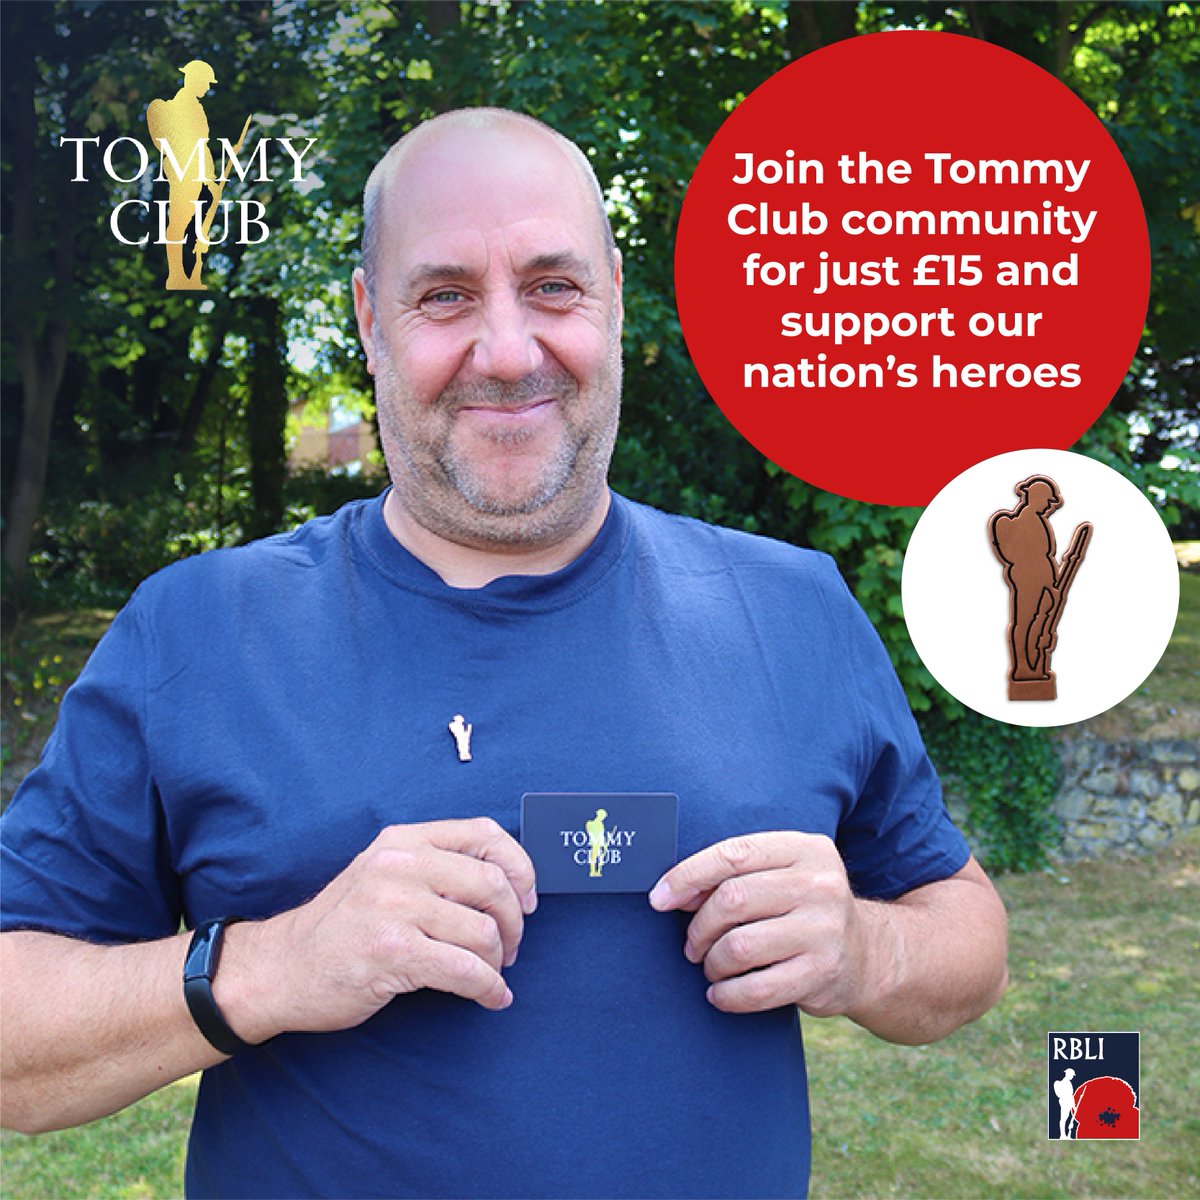 Become a #TommyClubChampion and support our nation’s heroes for just £15 per year! If you’re looking for an easy way to help Armed Forces veterans, the Tommy Club is the perfect way to achieve that. Become a Tommy Club Champion here: brnw.ch/21wHdfG